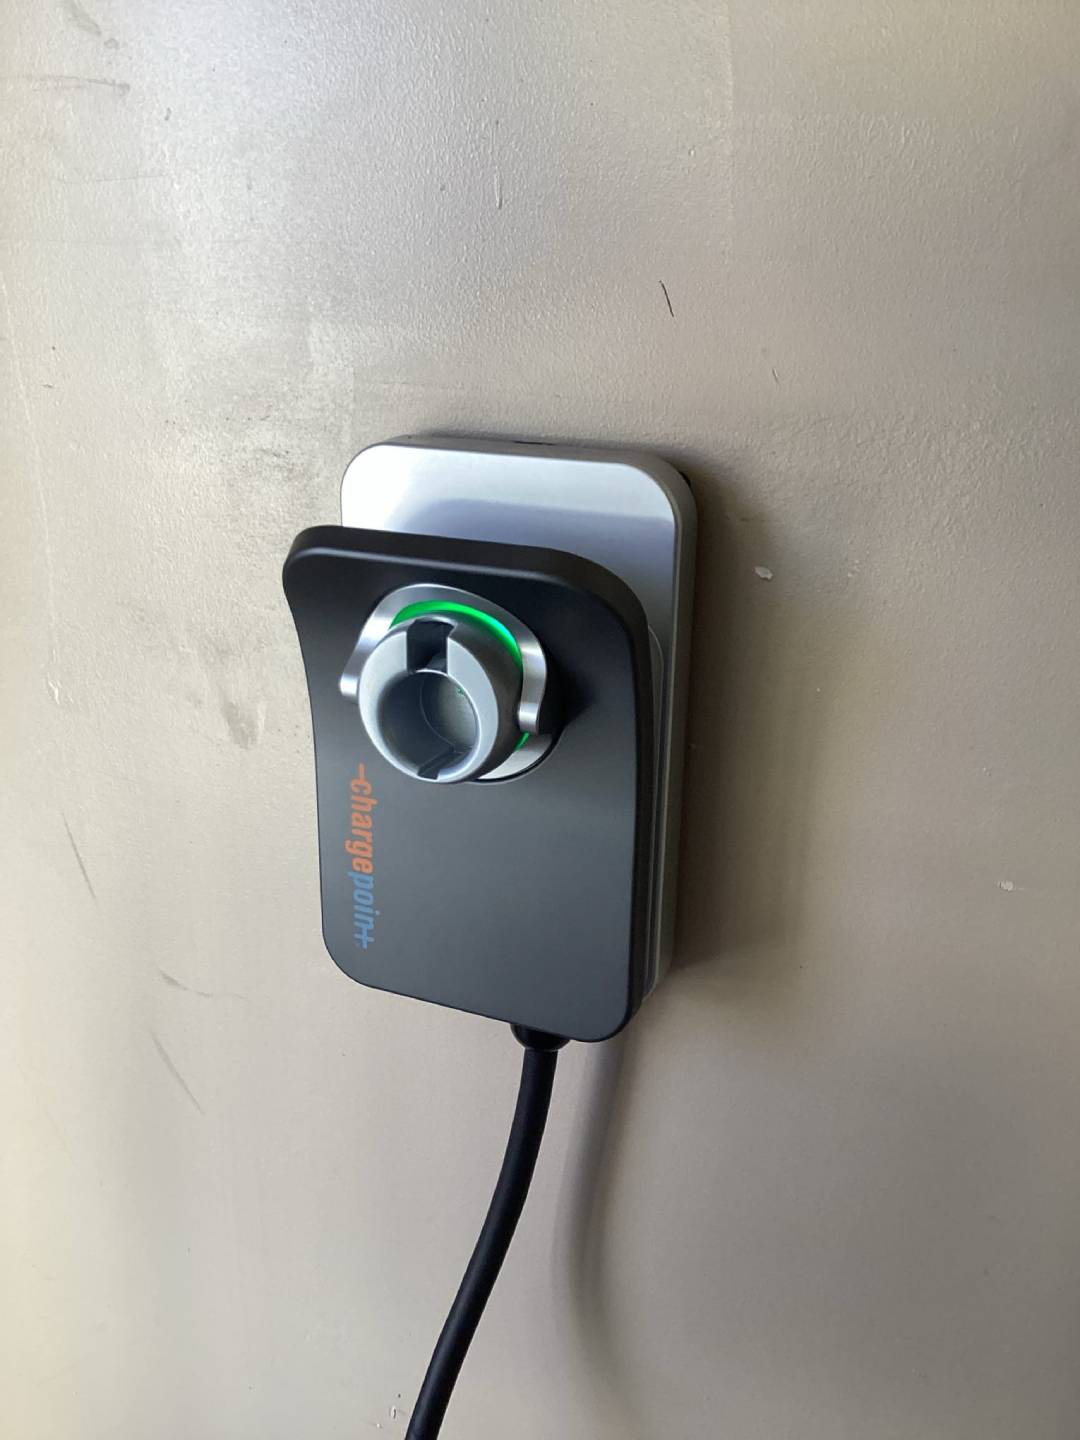 Residential electric vehicle charging station installed in Tucson by Done Rite Services, enhancing home electrification.